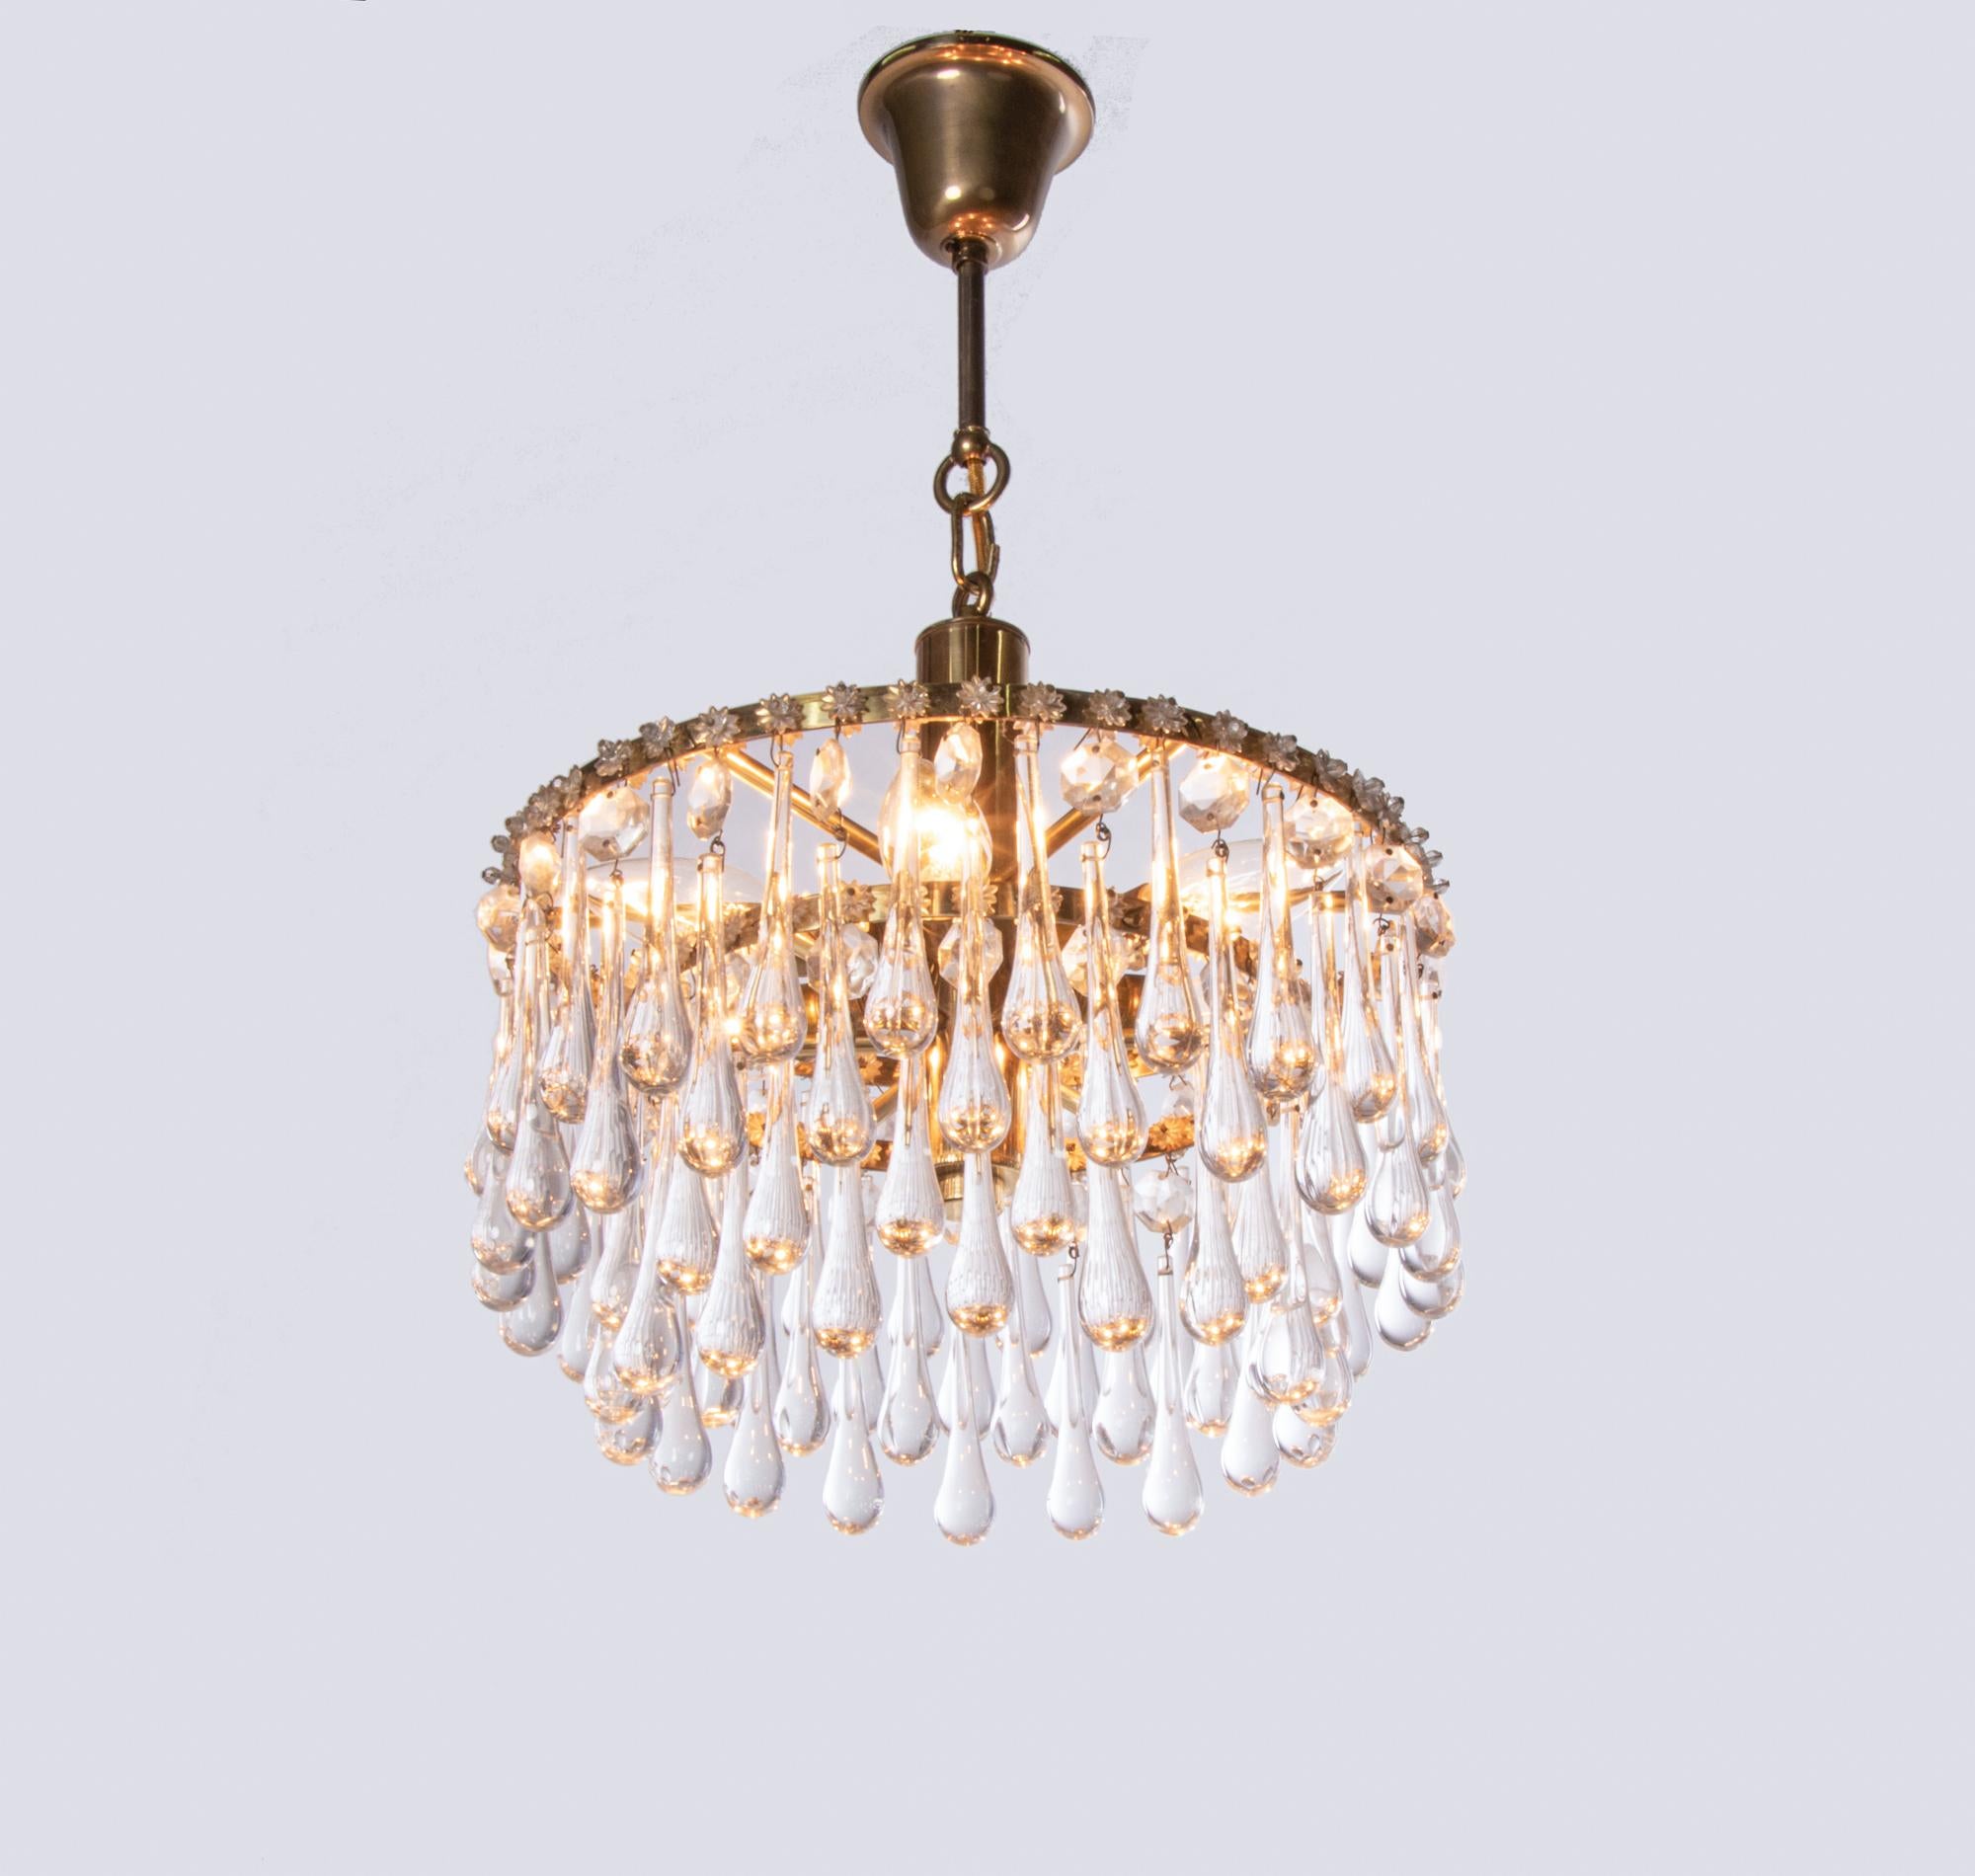 Beautiful and elegant chandelier with teardrop crystals on a tiered brass base. 

Measures: diameter 13